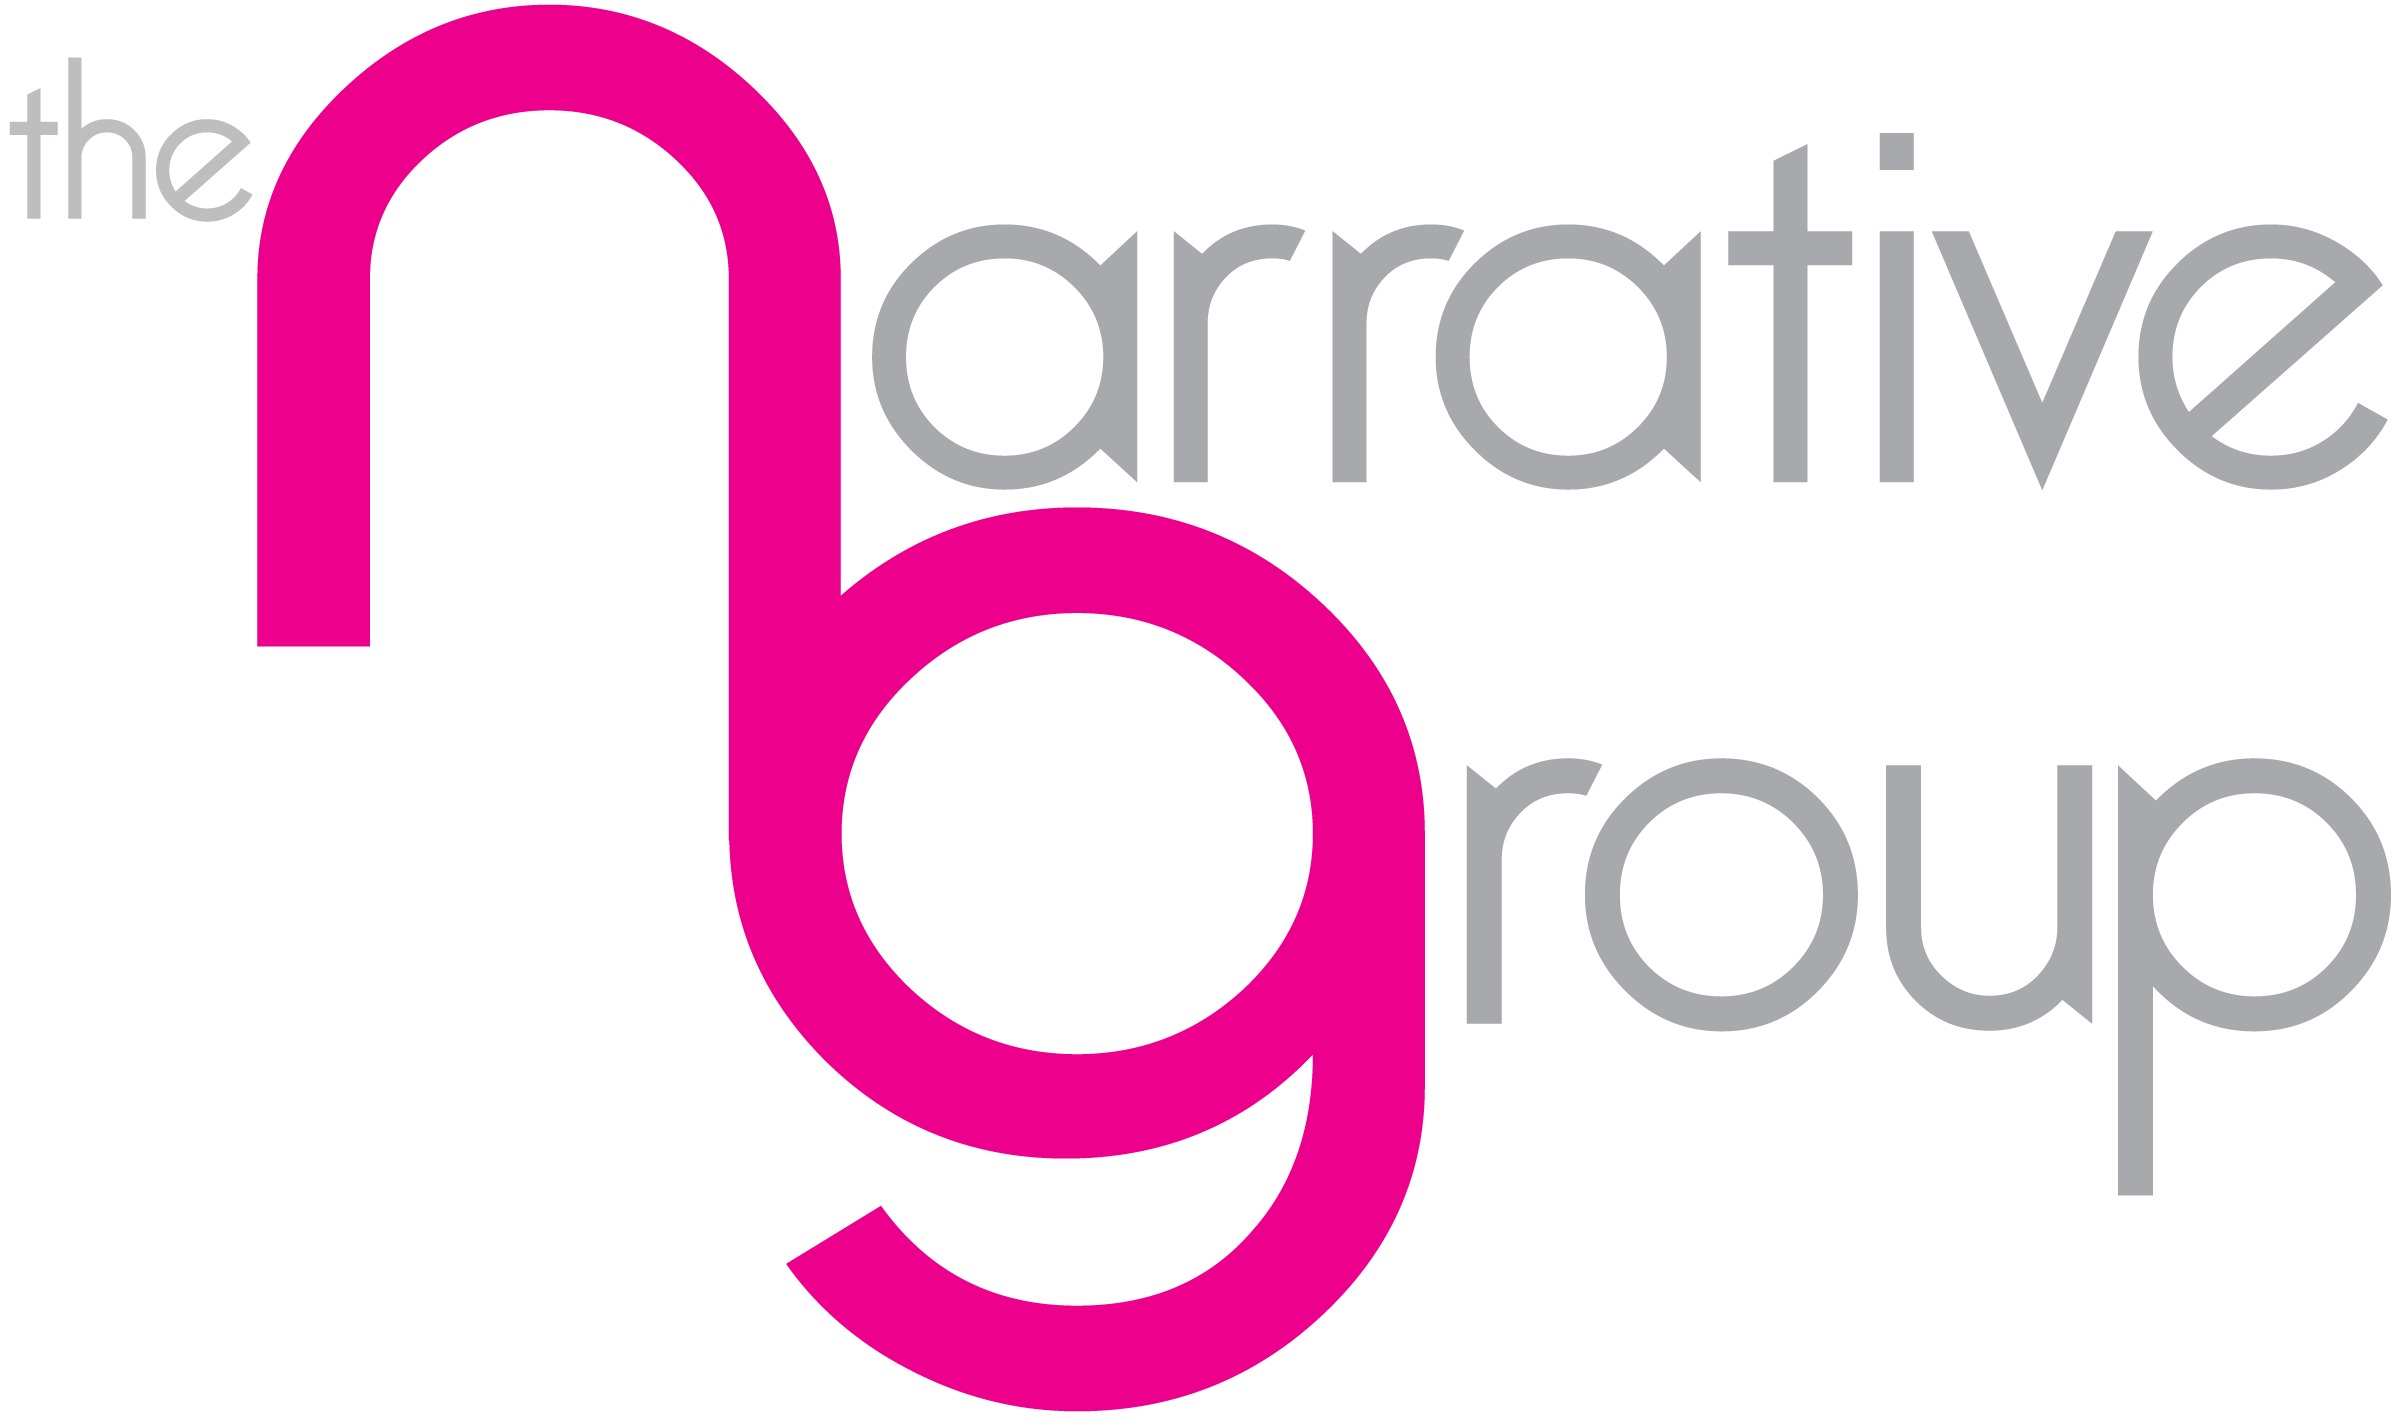 The Narrative Group - Logo - https://s41078.pcdn.co/wp-content/uploads/2018/05/Events-Agency.jpg